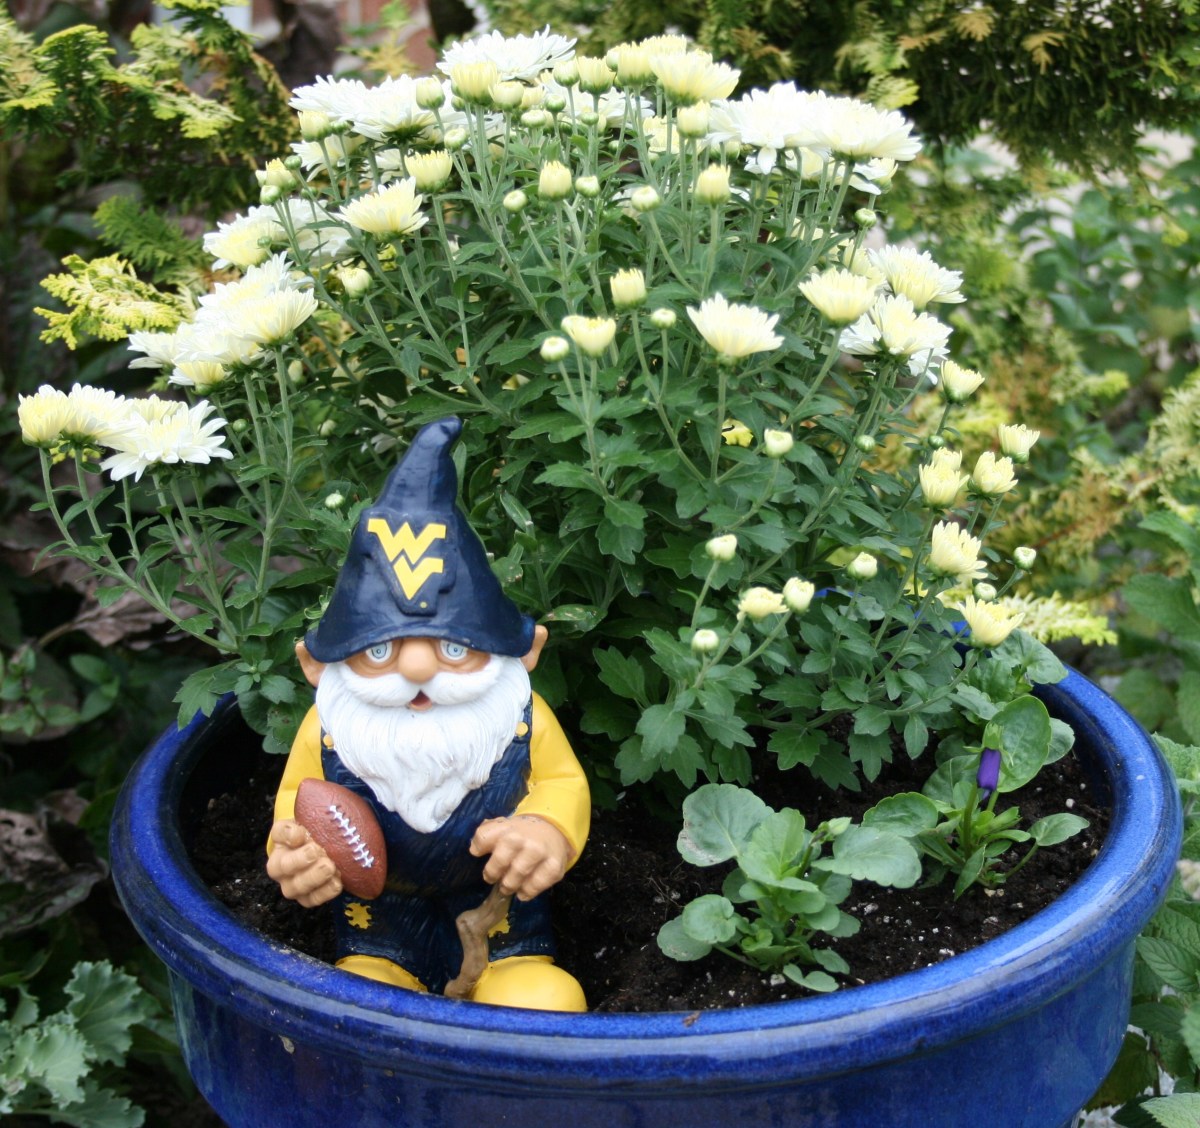 Football season is a great time to show your spirit with pots, plants & accessories in your favorite team's colors.